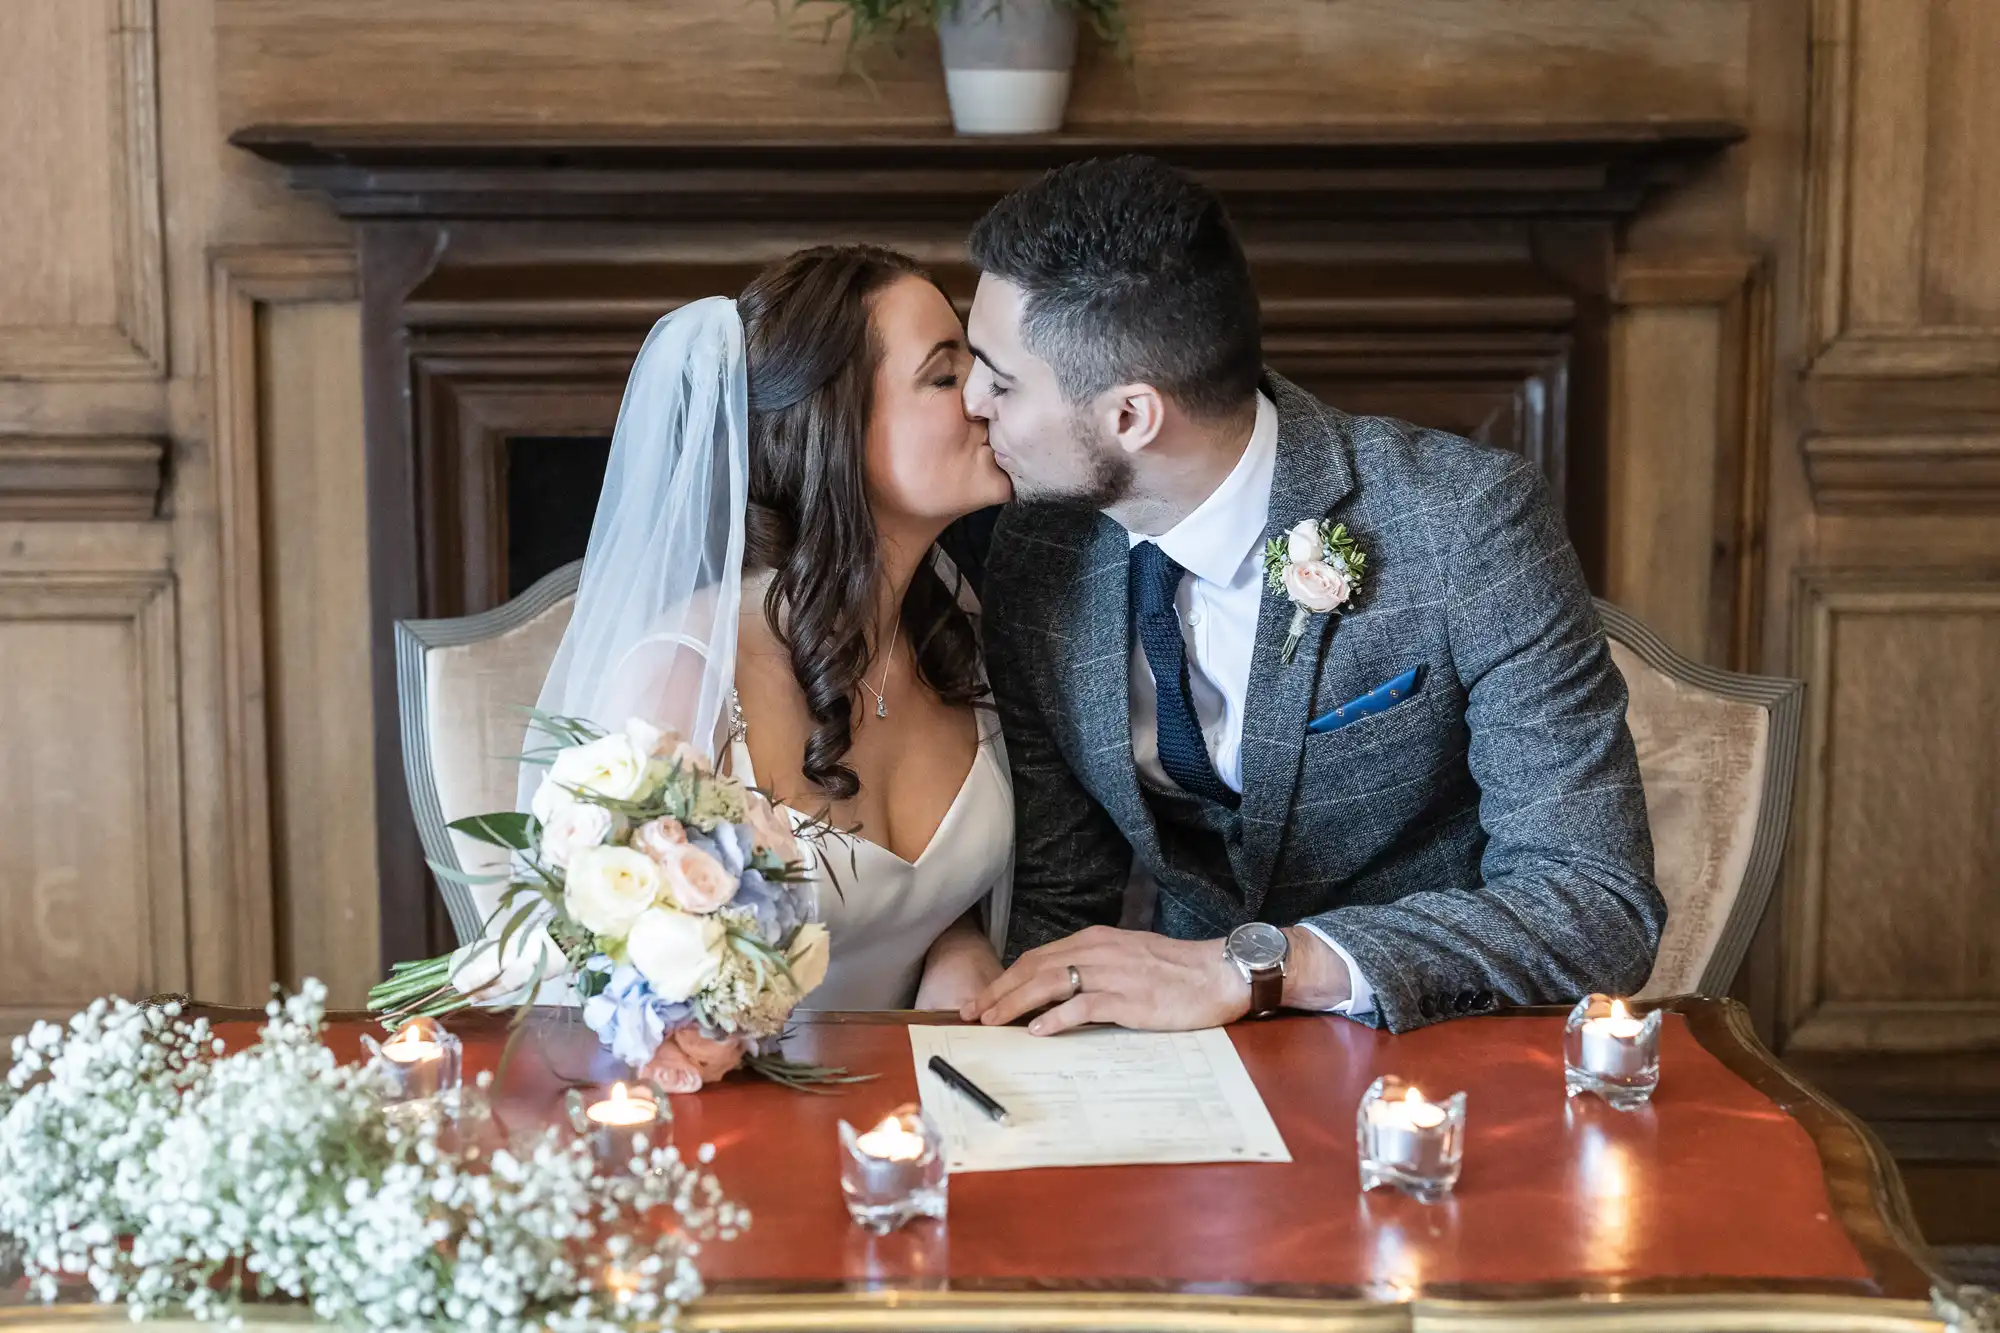 Newlyweds kiss each other after signing the marriage schedule